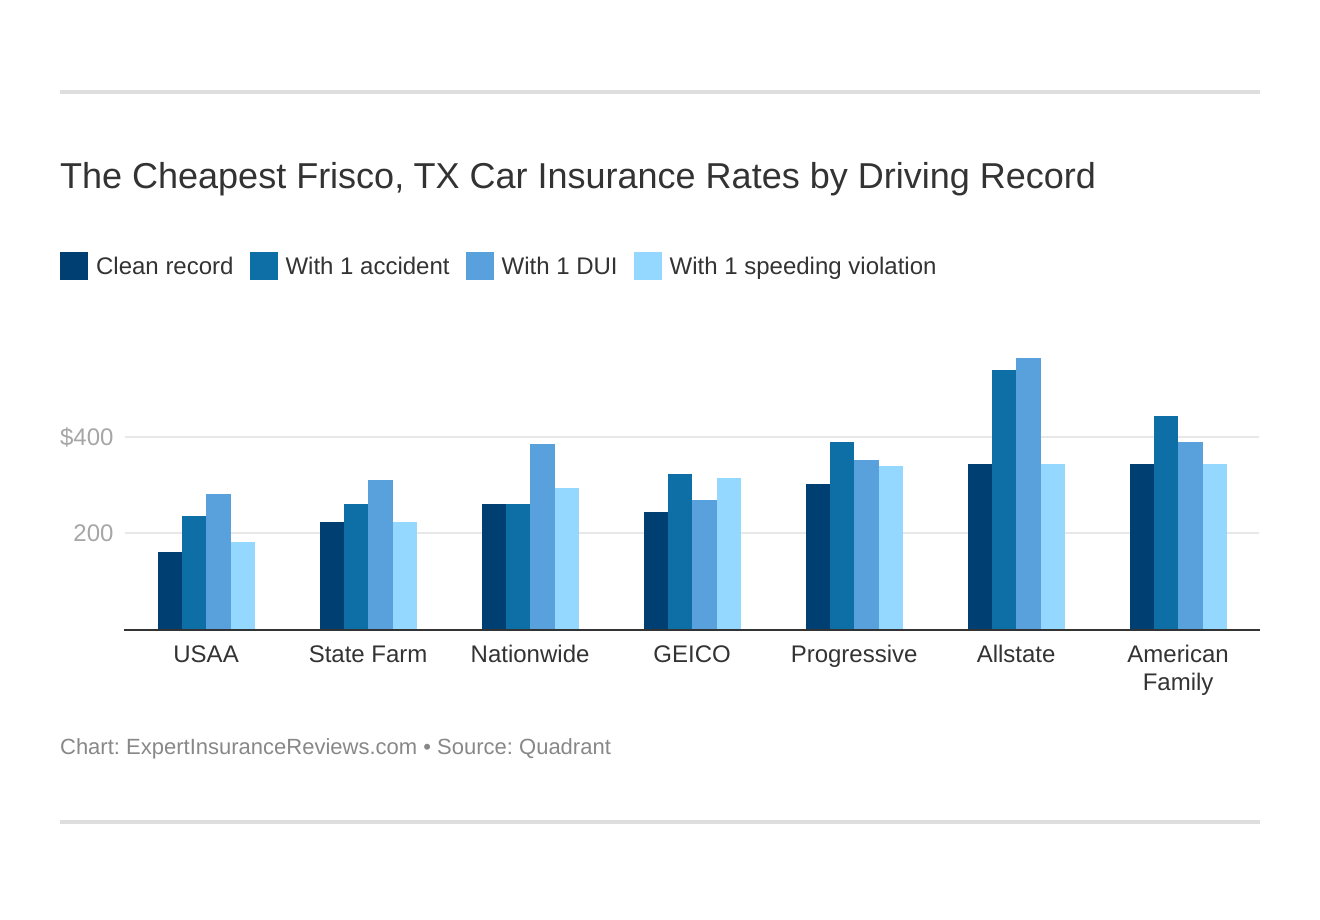 The Cheapest Frisco, TX Car Insurance Rates by Driving Record